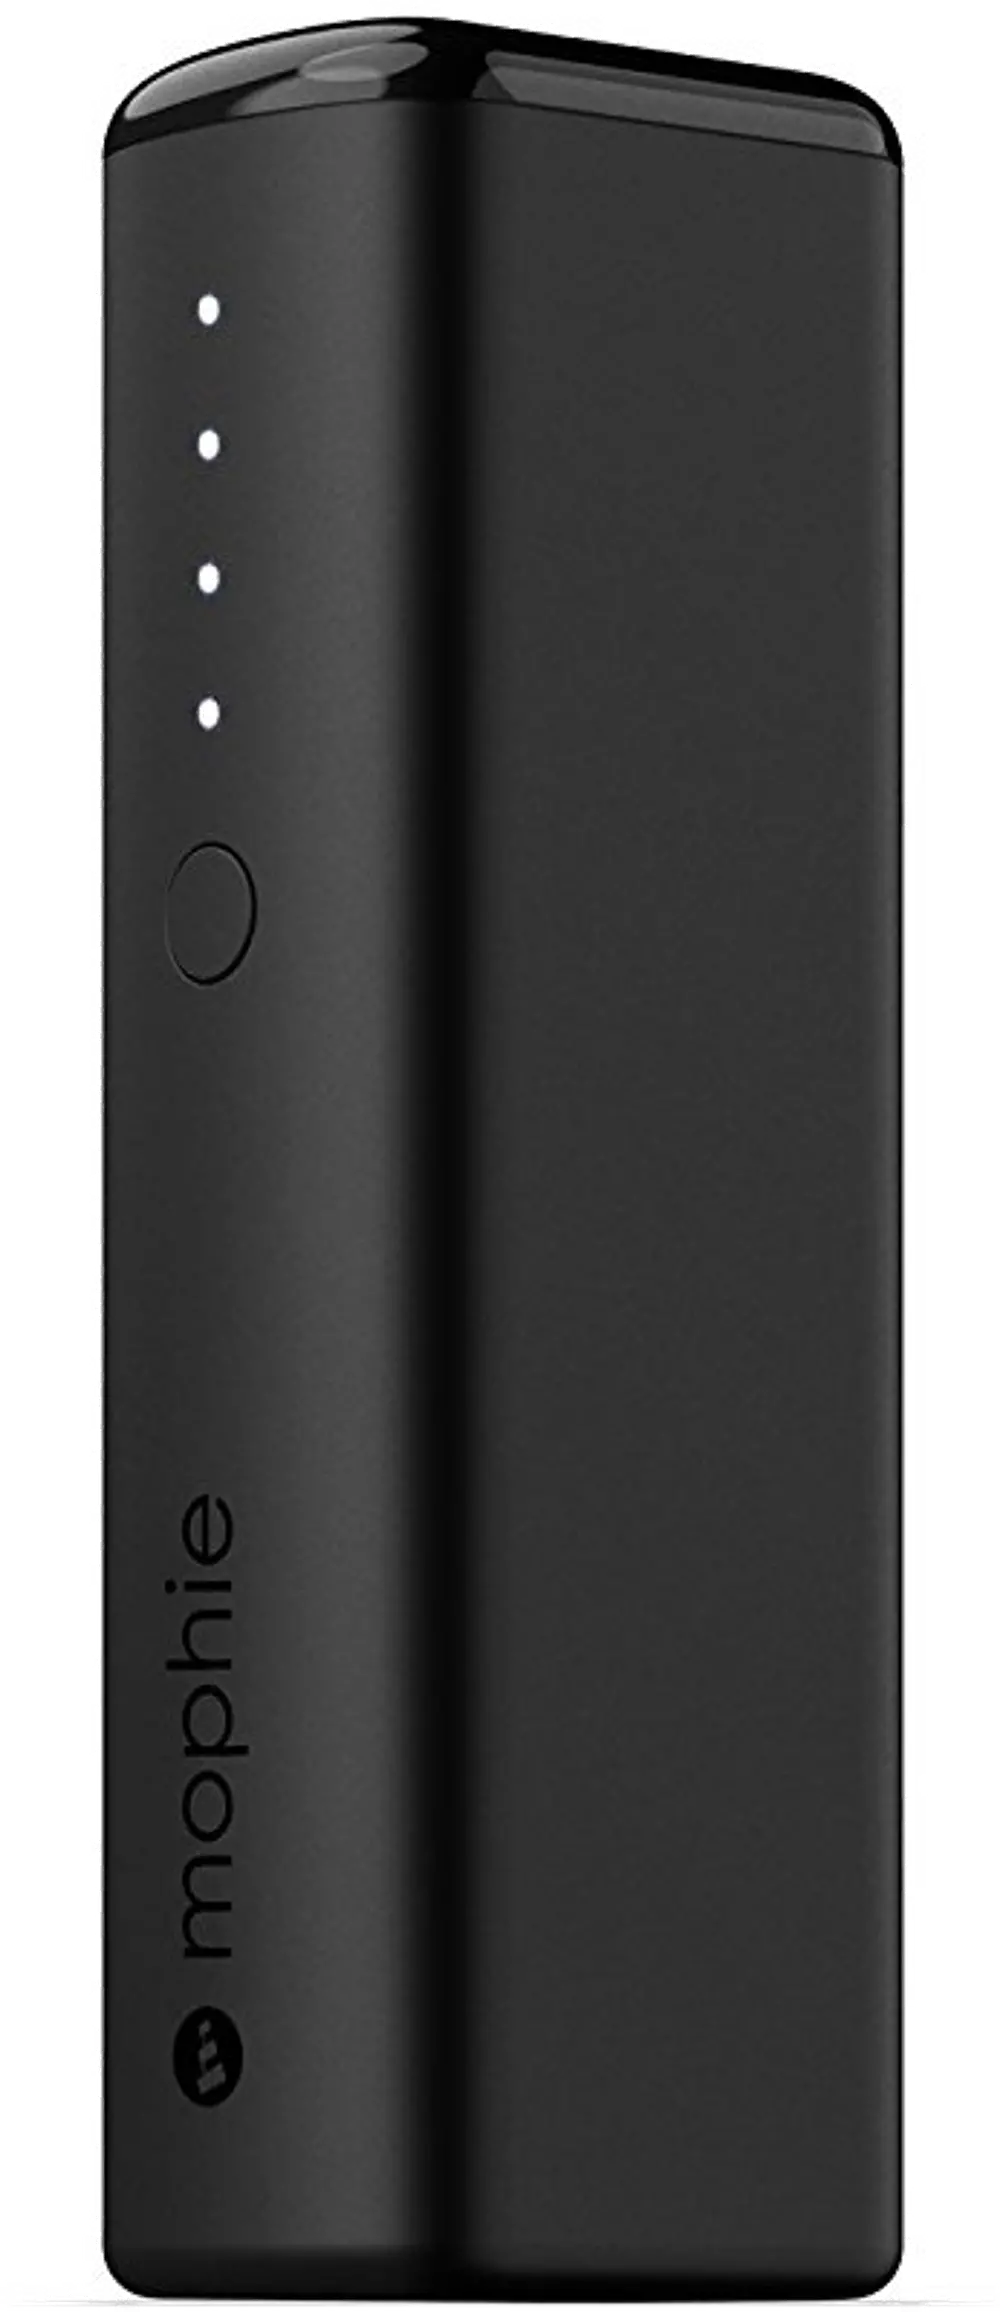 4055_PWR_BST-2.6K-BK mophie Powerstation Boost Mini External Battery for Universal Smartphones and Tablets (2,600mAh) - Black-1